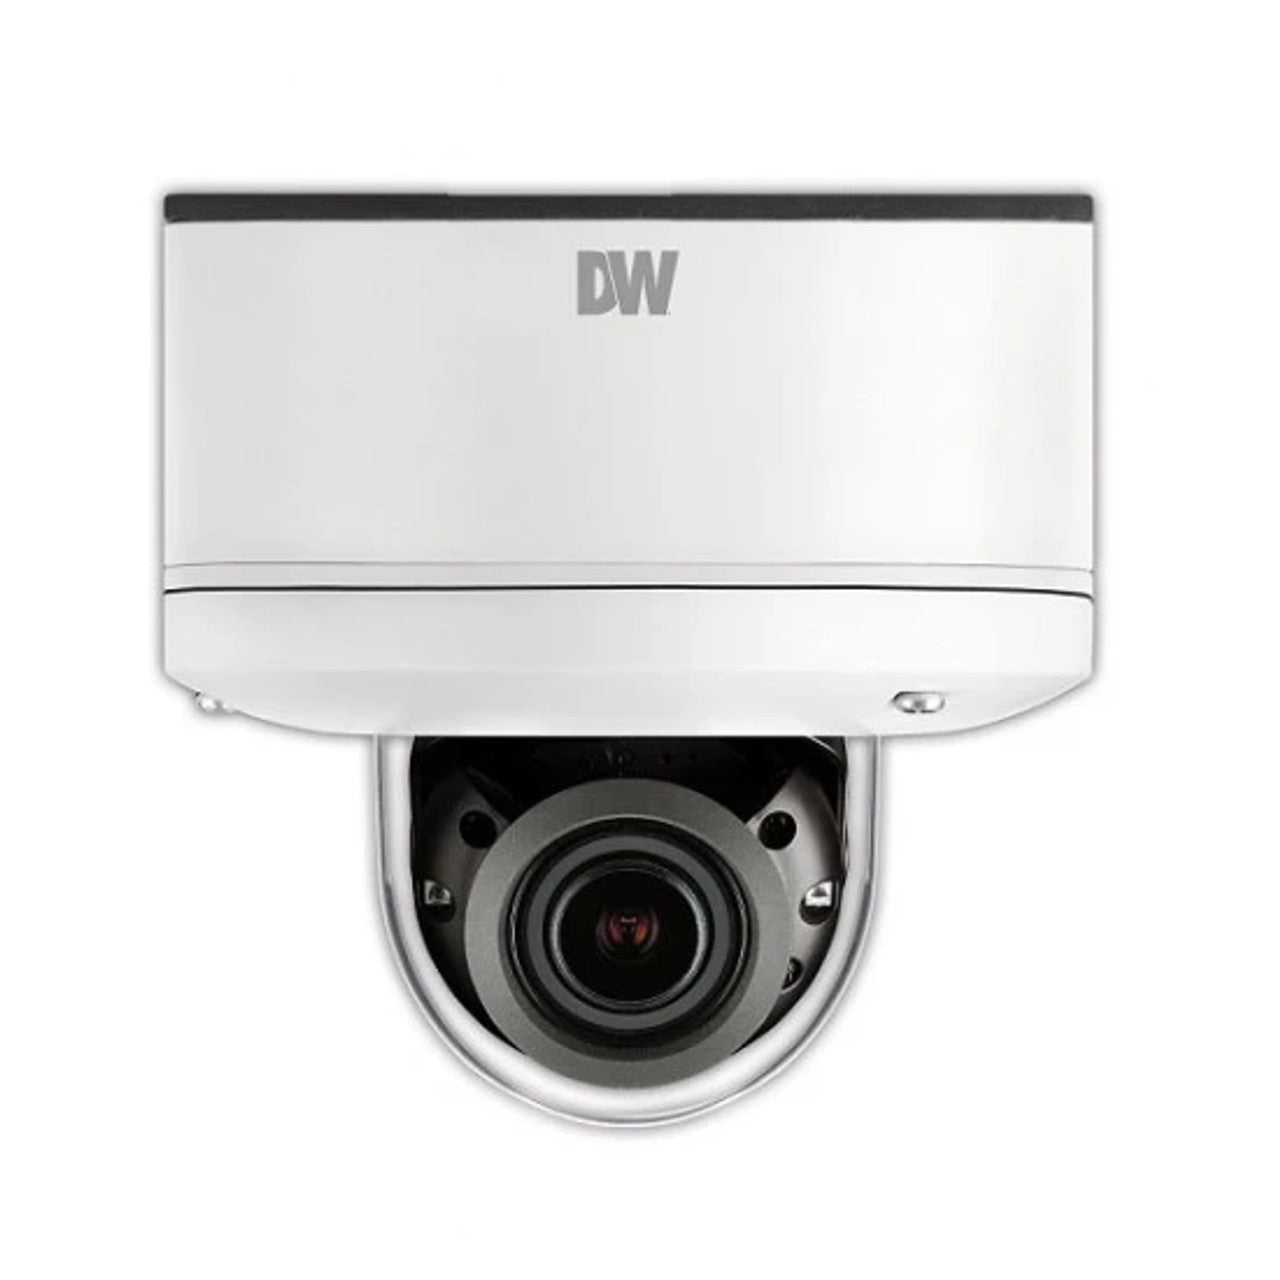 Digital Watchdog DWC-MPV45WiATW 5MP Night Vision Outdoor Snapit Dome IP Security Camera with 5x Optical Zoom